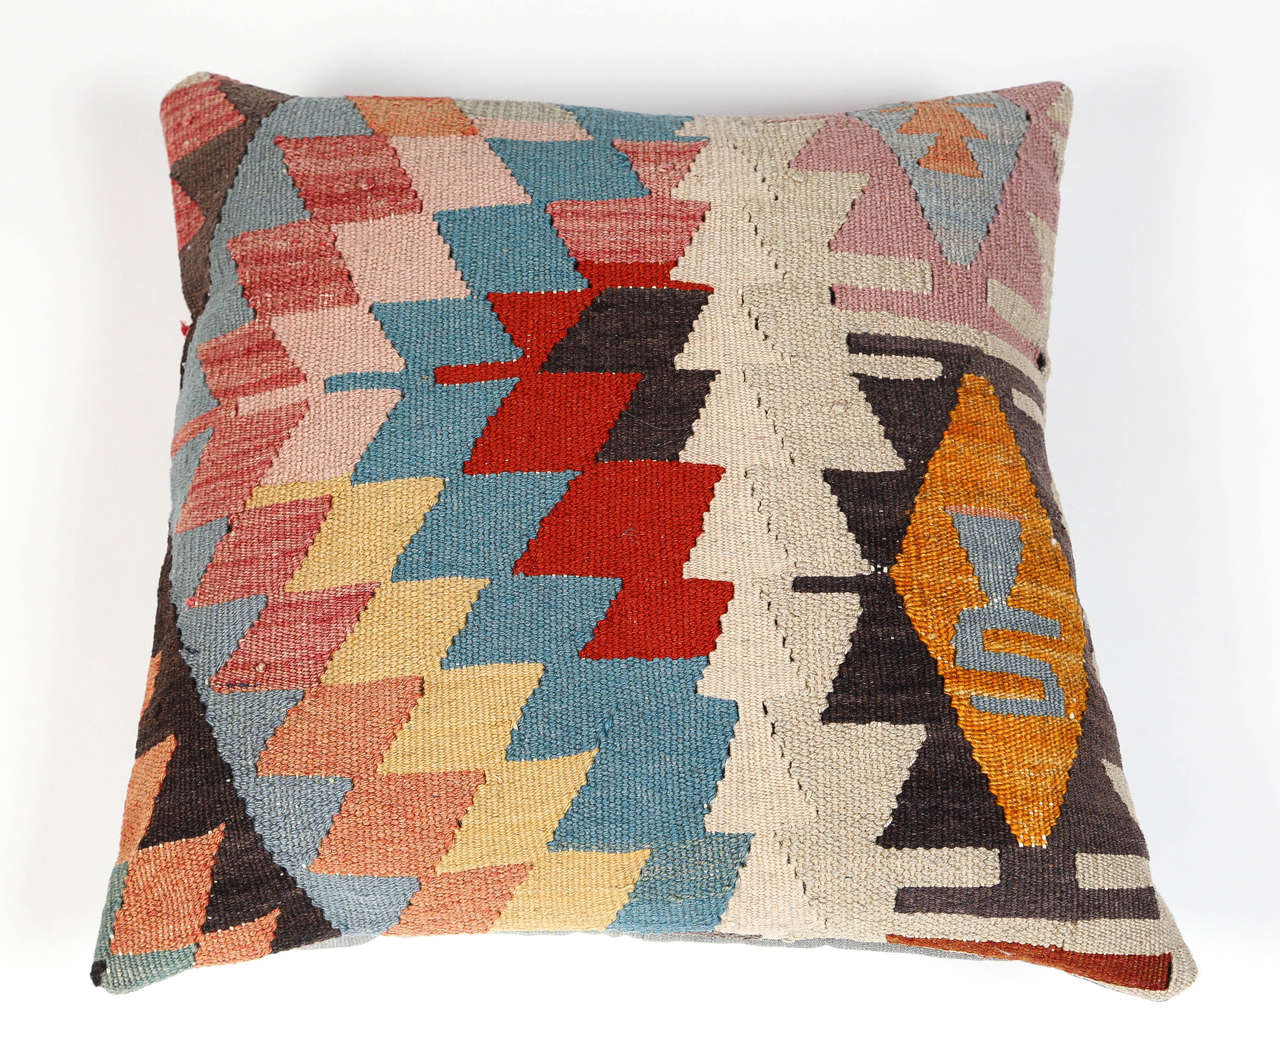 Vintage kilim pillow decorated with a geometric pattern. Solid pale blue fabric backing.